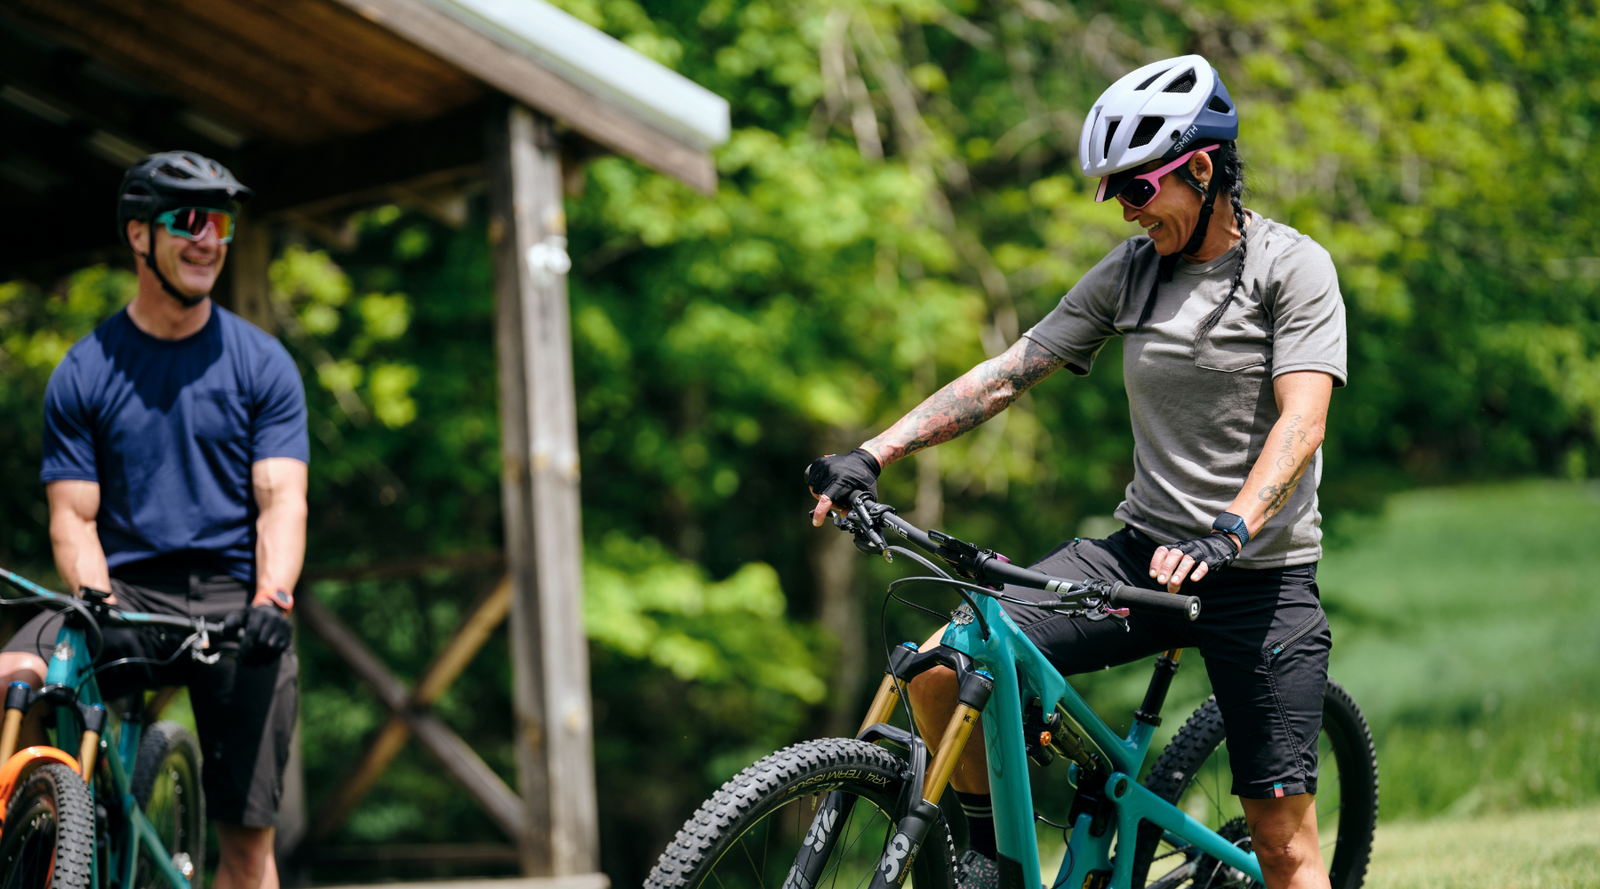 Pinebury Portland Merino Wool Tees in Atlantic Blue and Granite. Two mountain bikers one teal Yeti bikes, one male and one female, before a ride smiling in conversation.